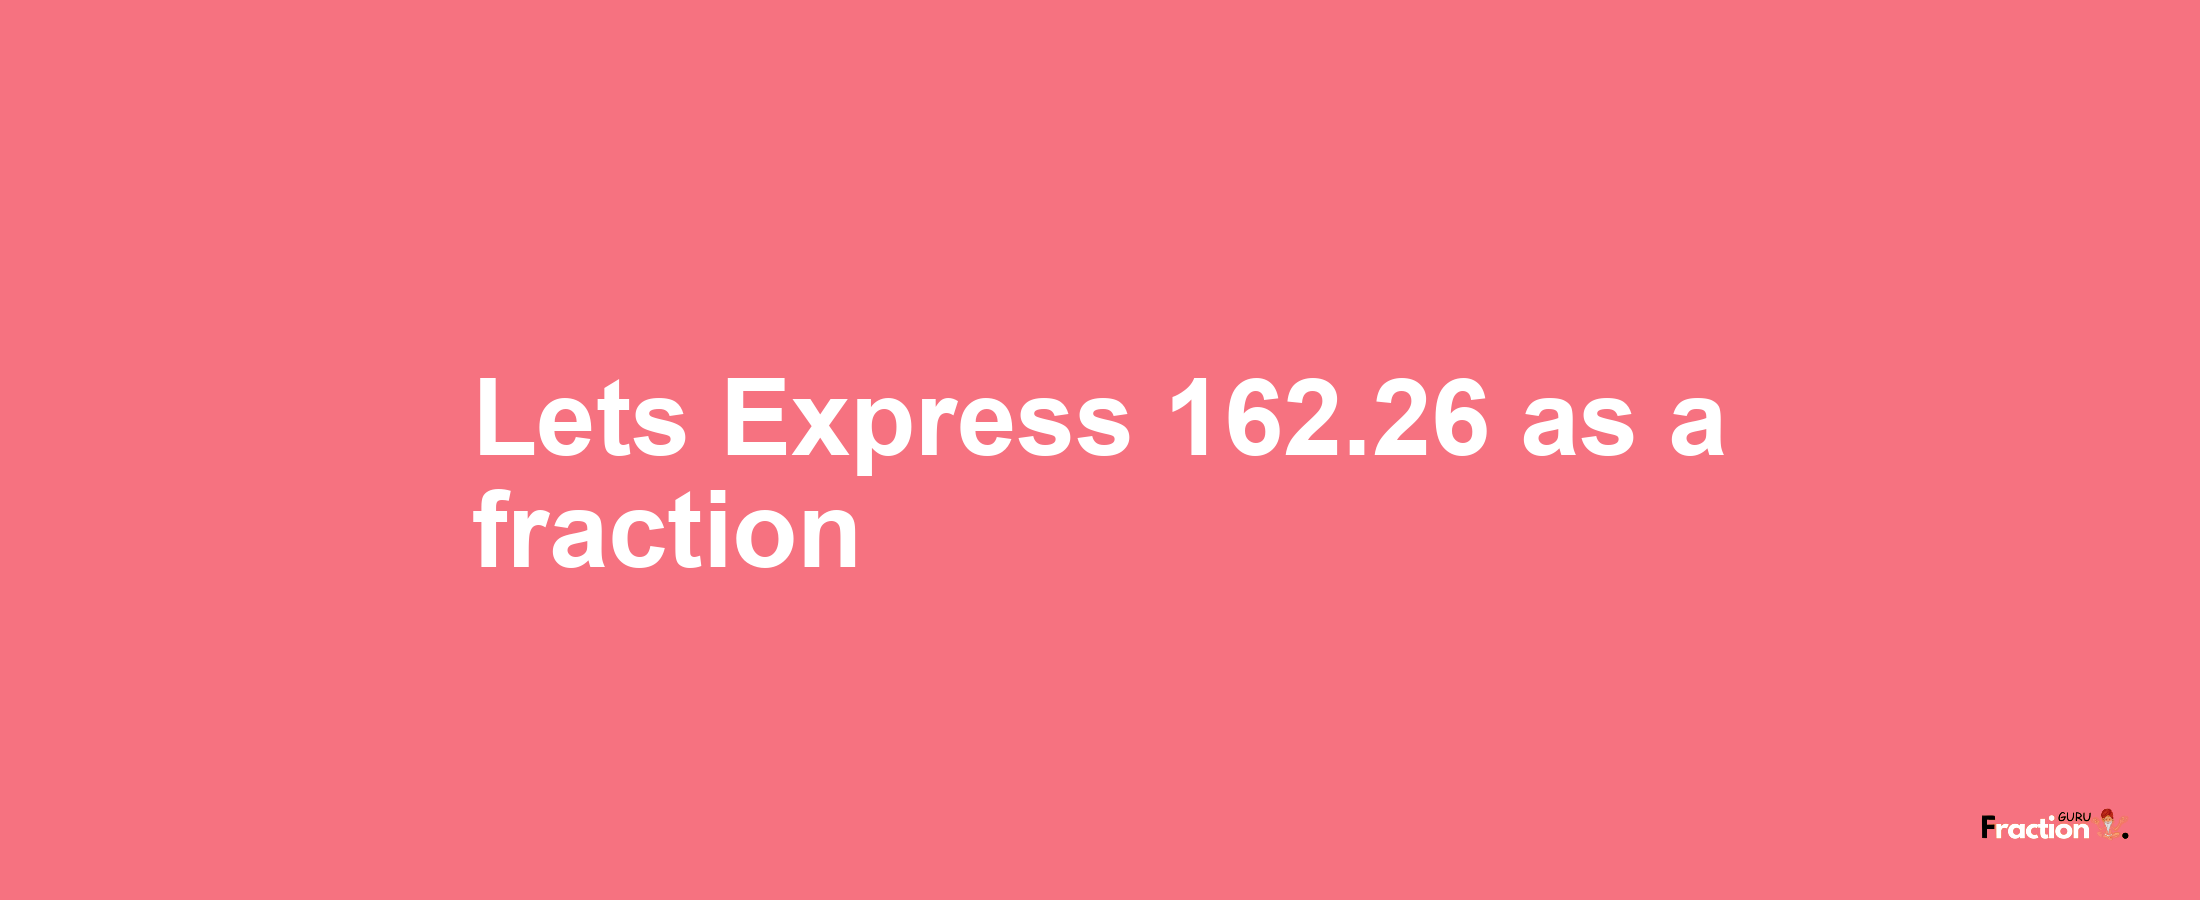 Lets Express 162.26 as afraction